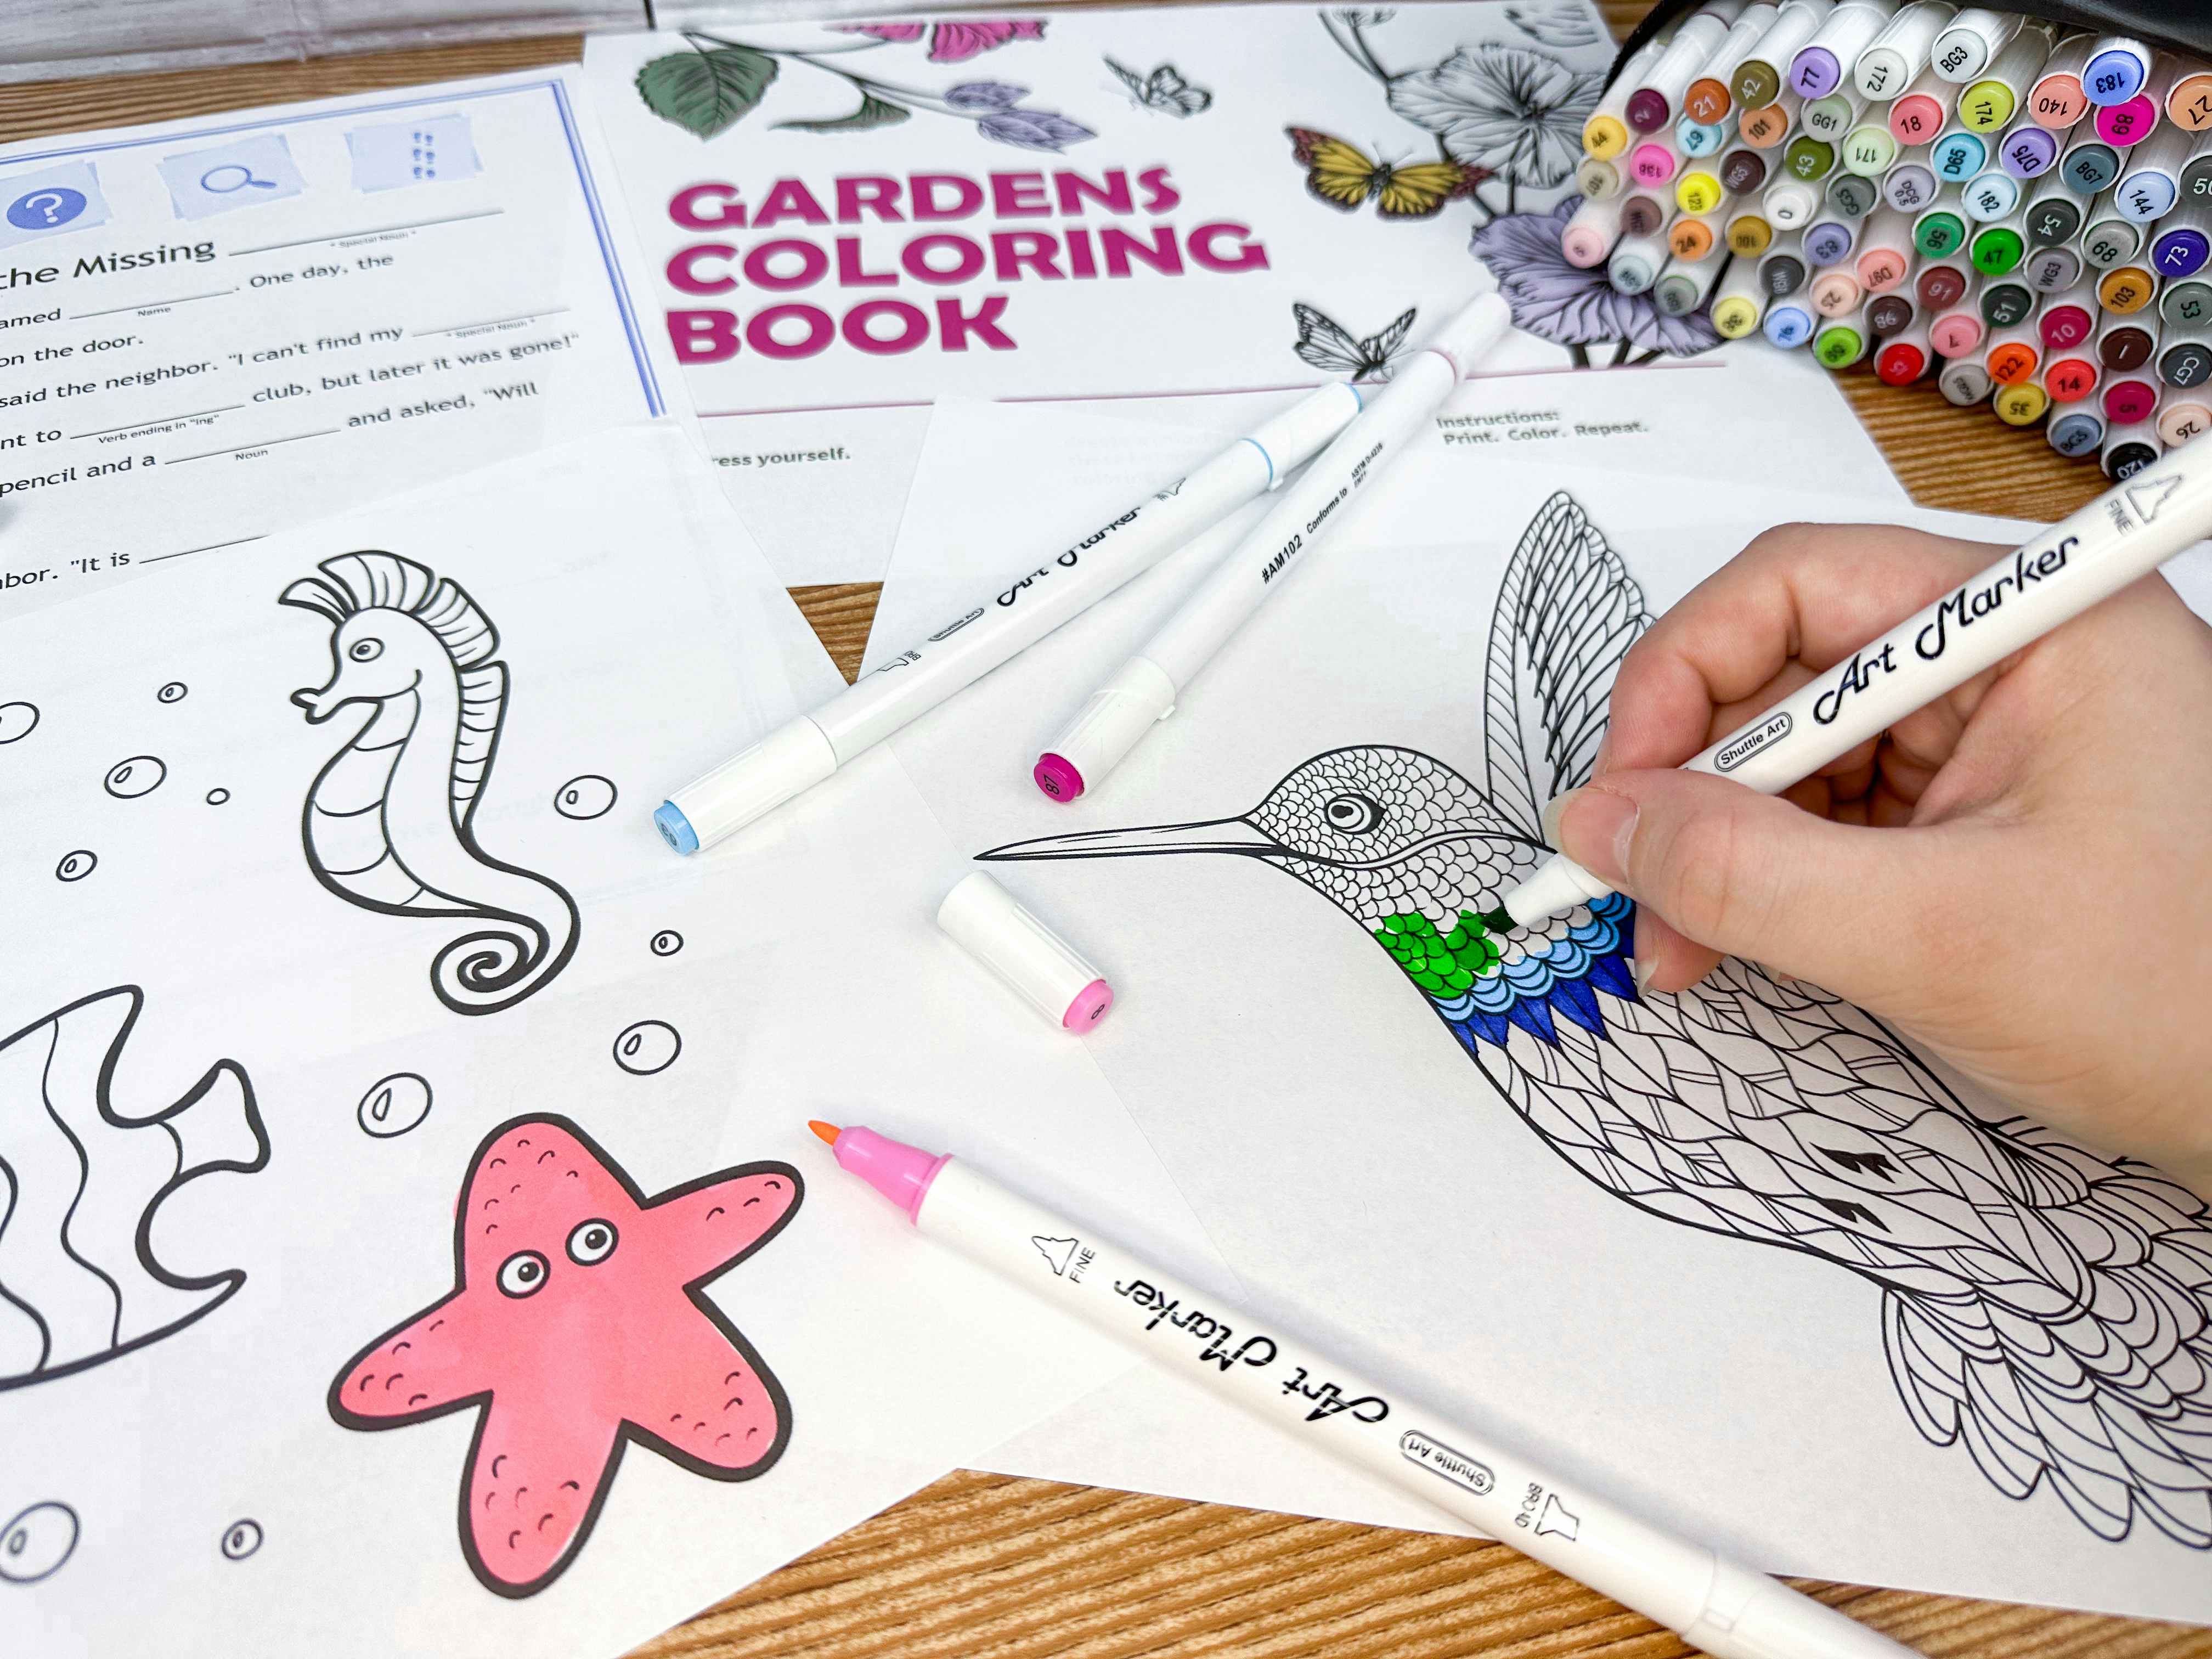 Coloring pages and activity print outs from the Microsoft Virtual camp printables, with art markers and someone coloring in a hummingbird coloring page